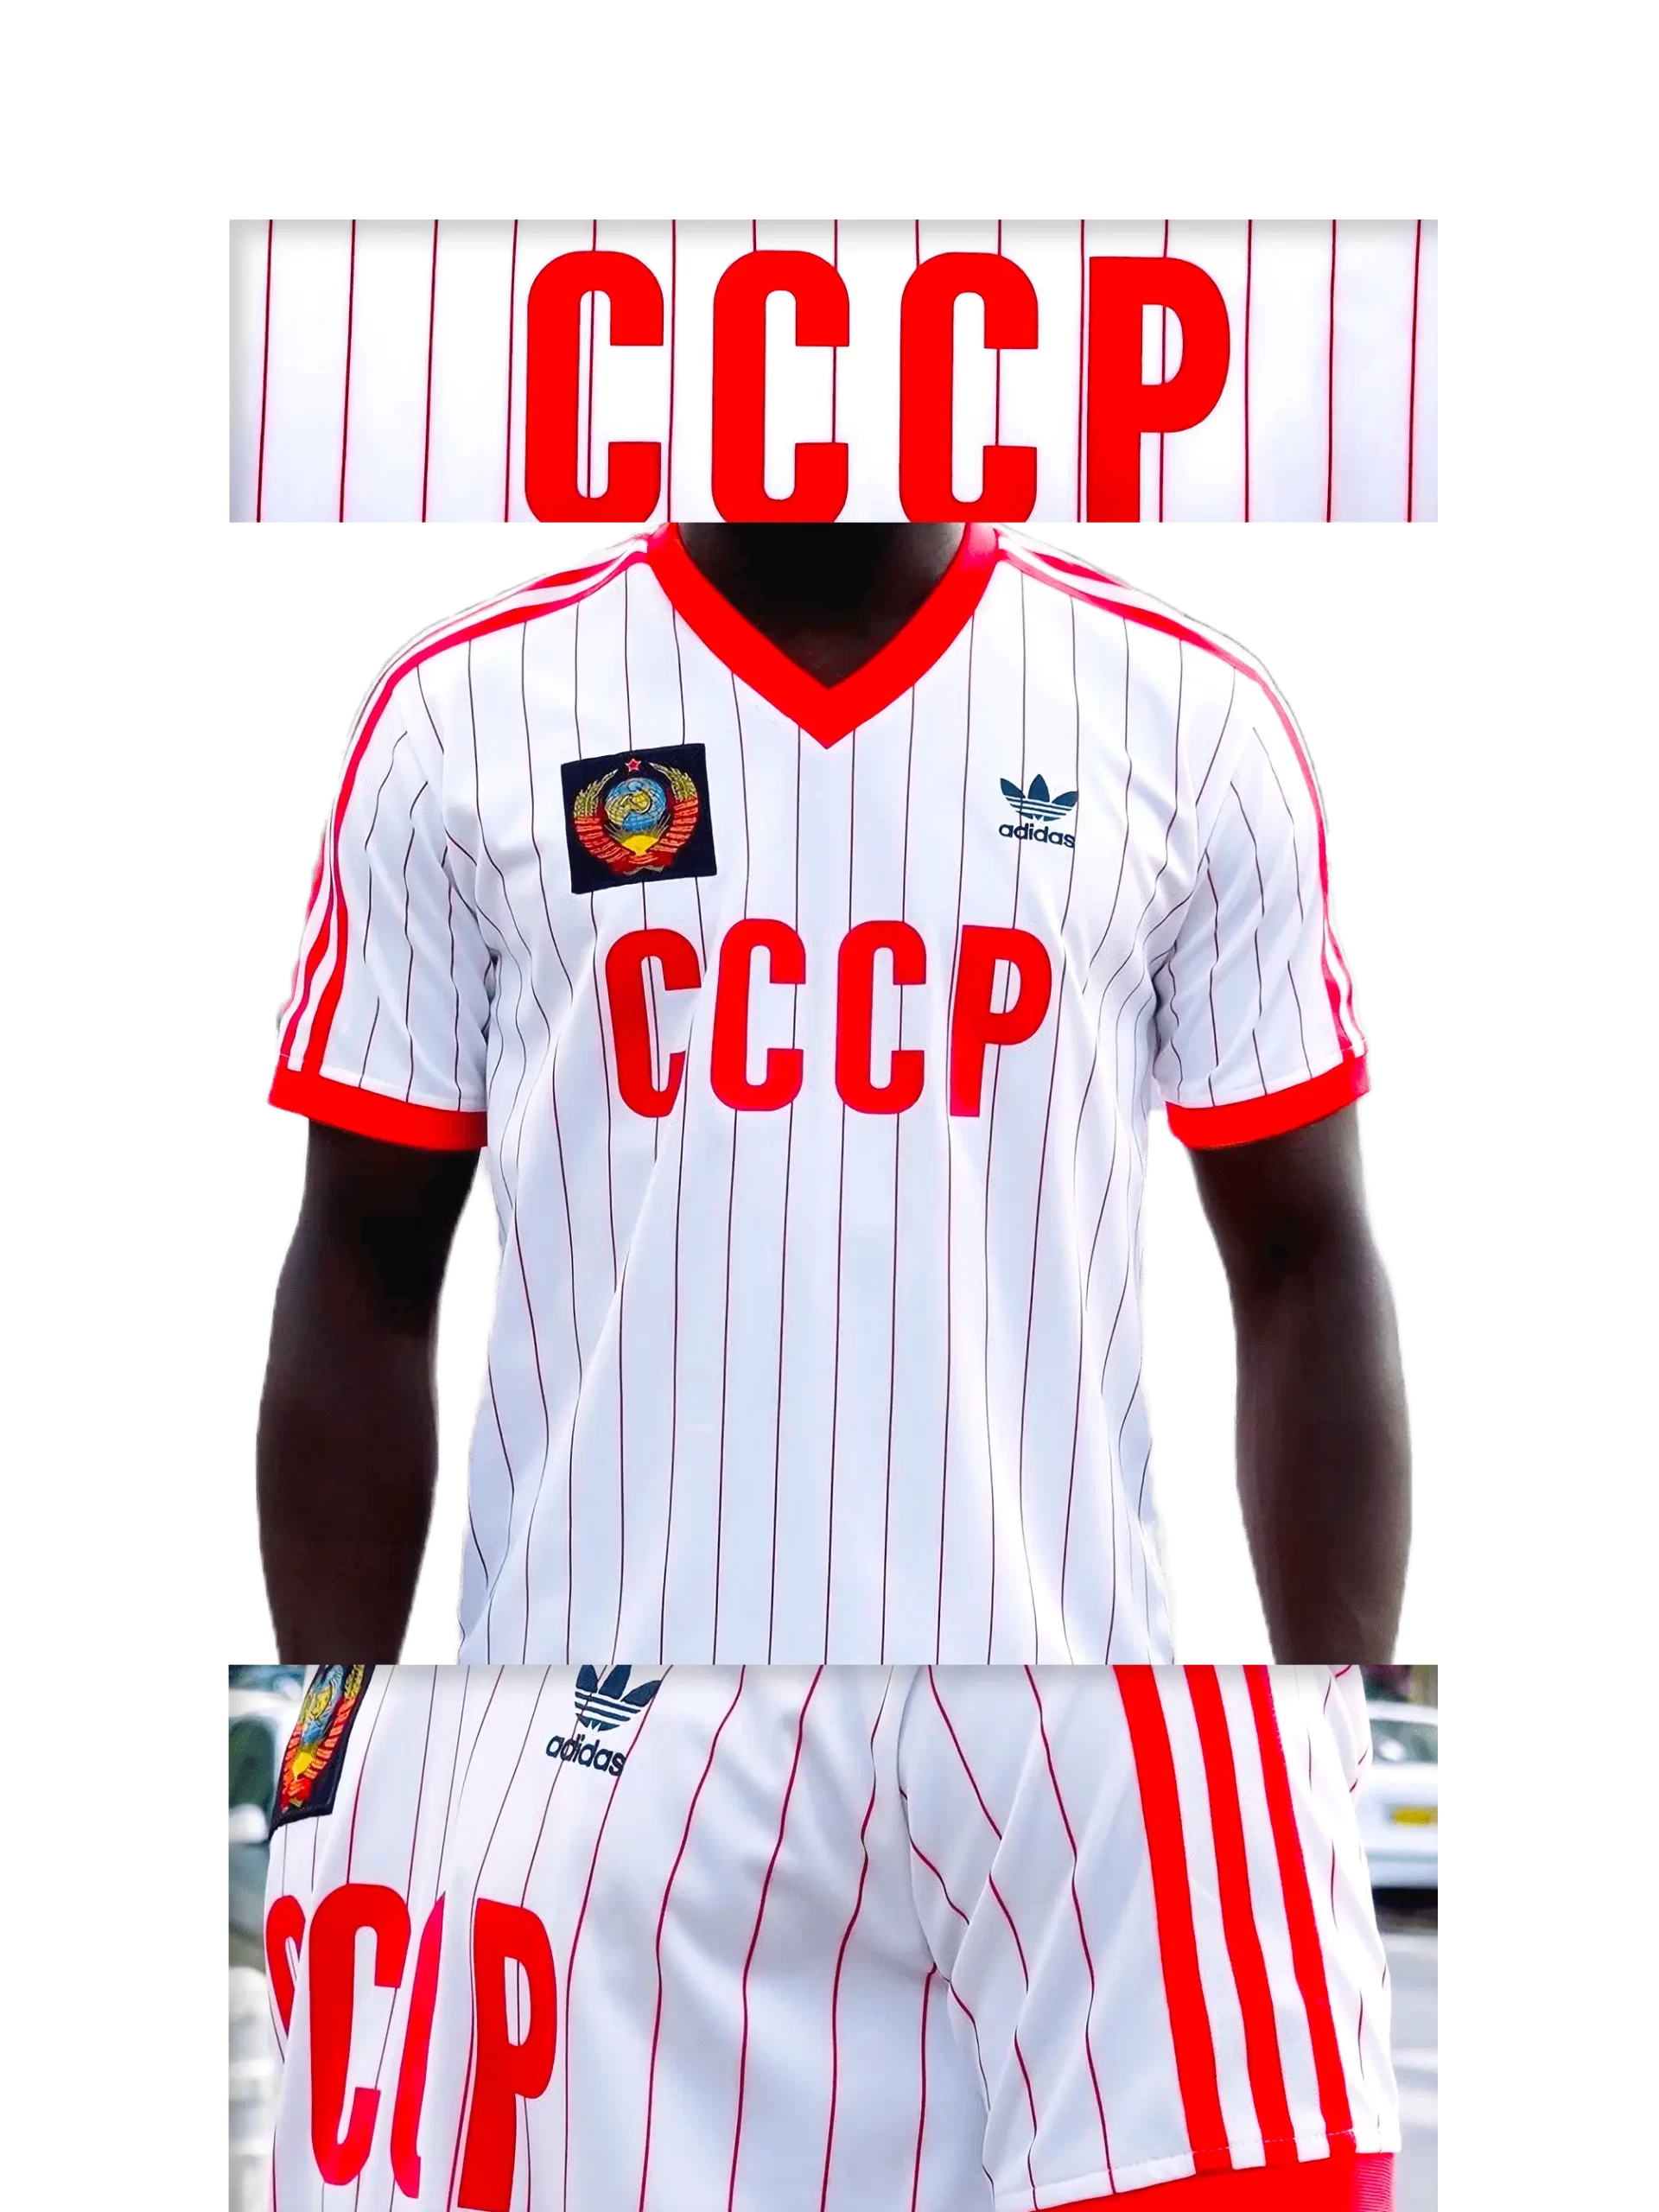 Men's 2004 Soviet CCCP '82 Jersey by Adidas Originals: Strong (EnLawded.com file #lmchk65739ip2y123824kg9st)